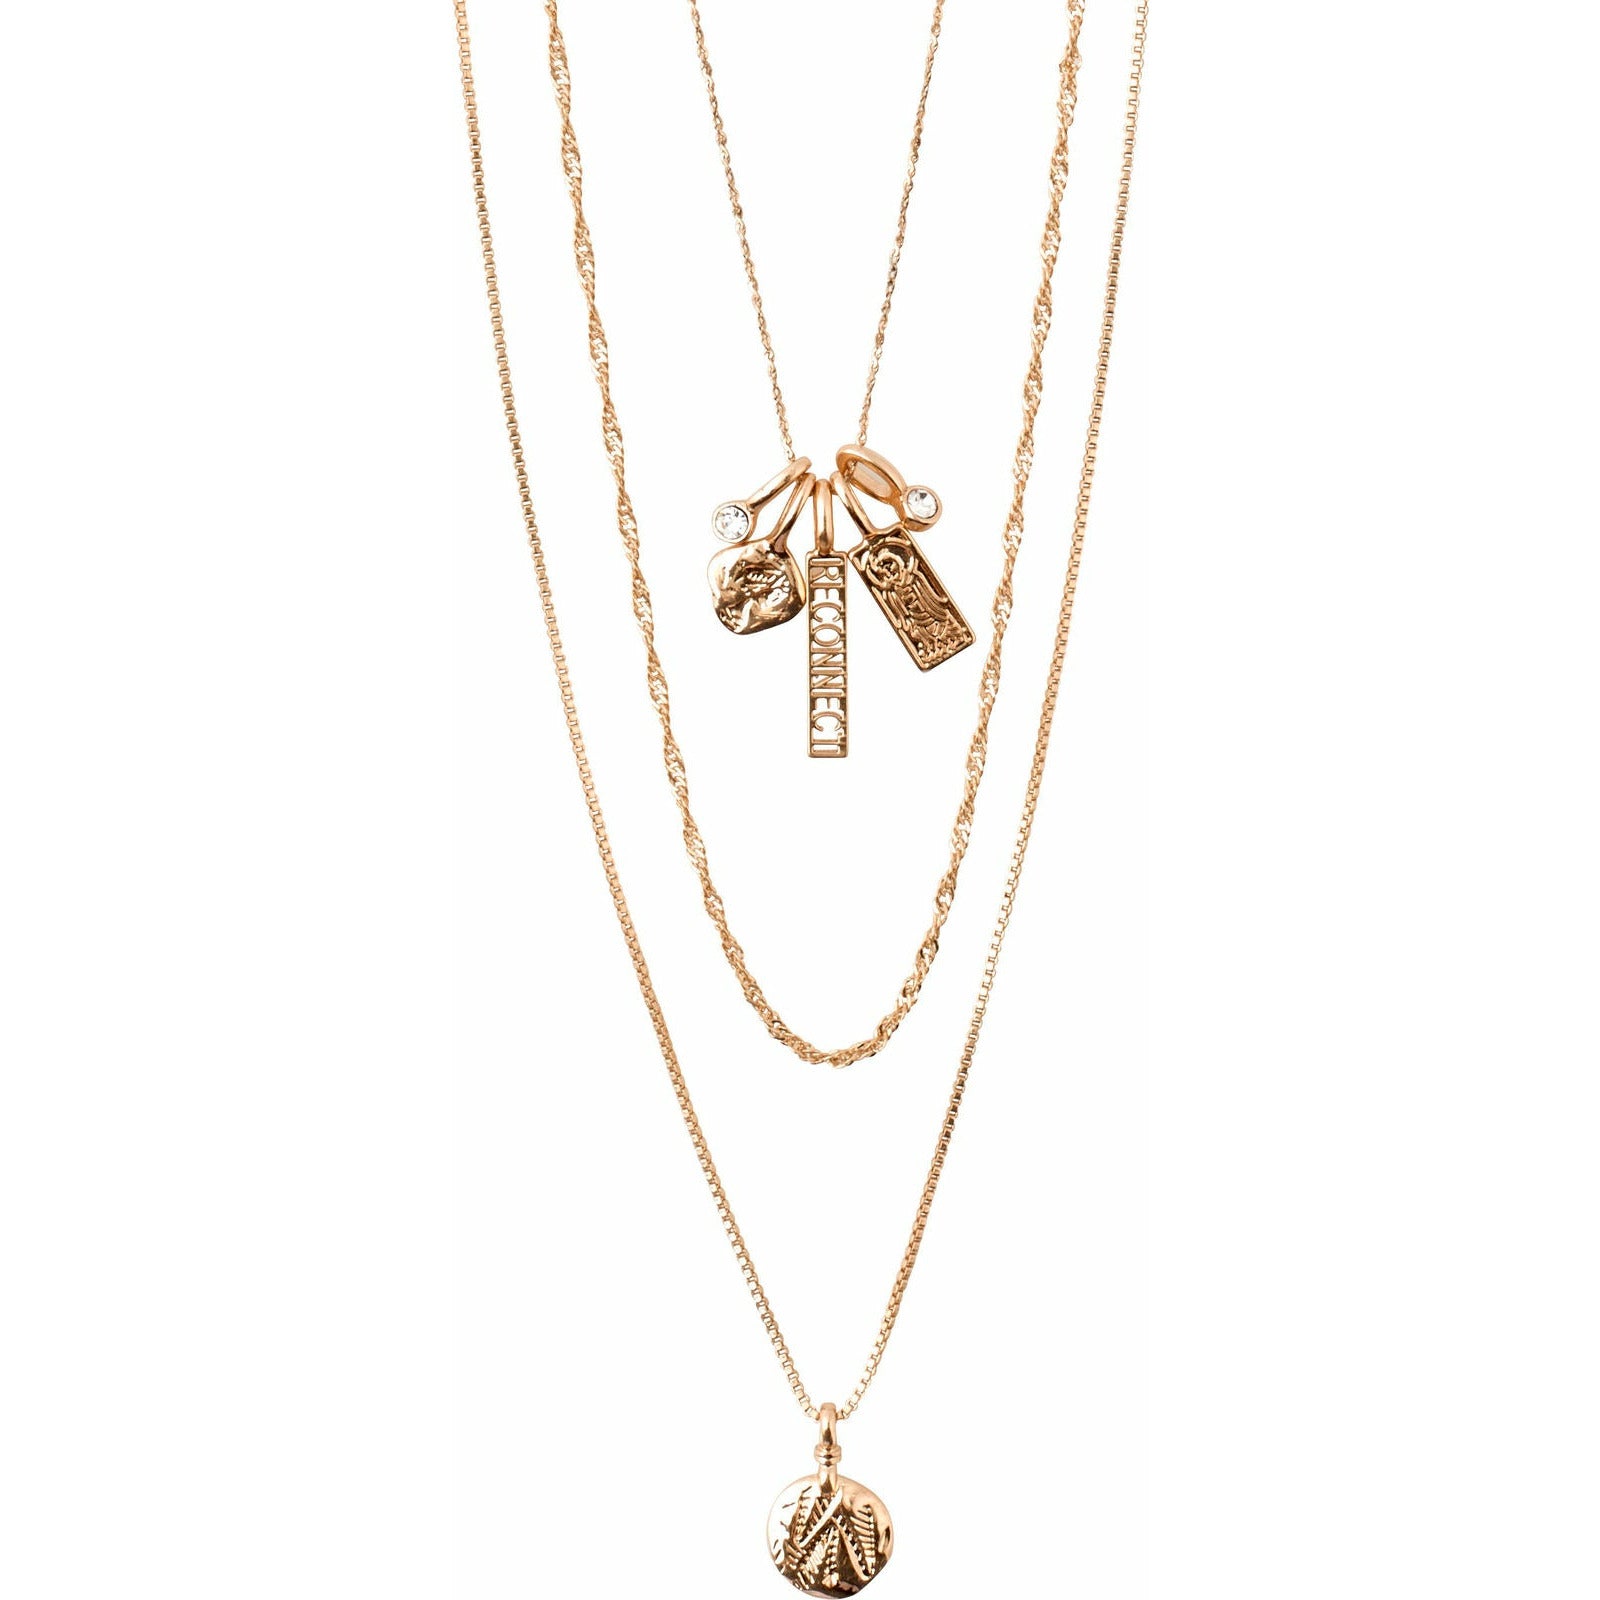 Pilgrim Jewellery Rose Gold-Plated Legacy 3 in 1 Necklace 